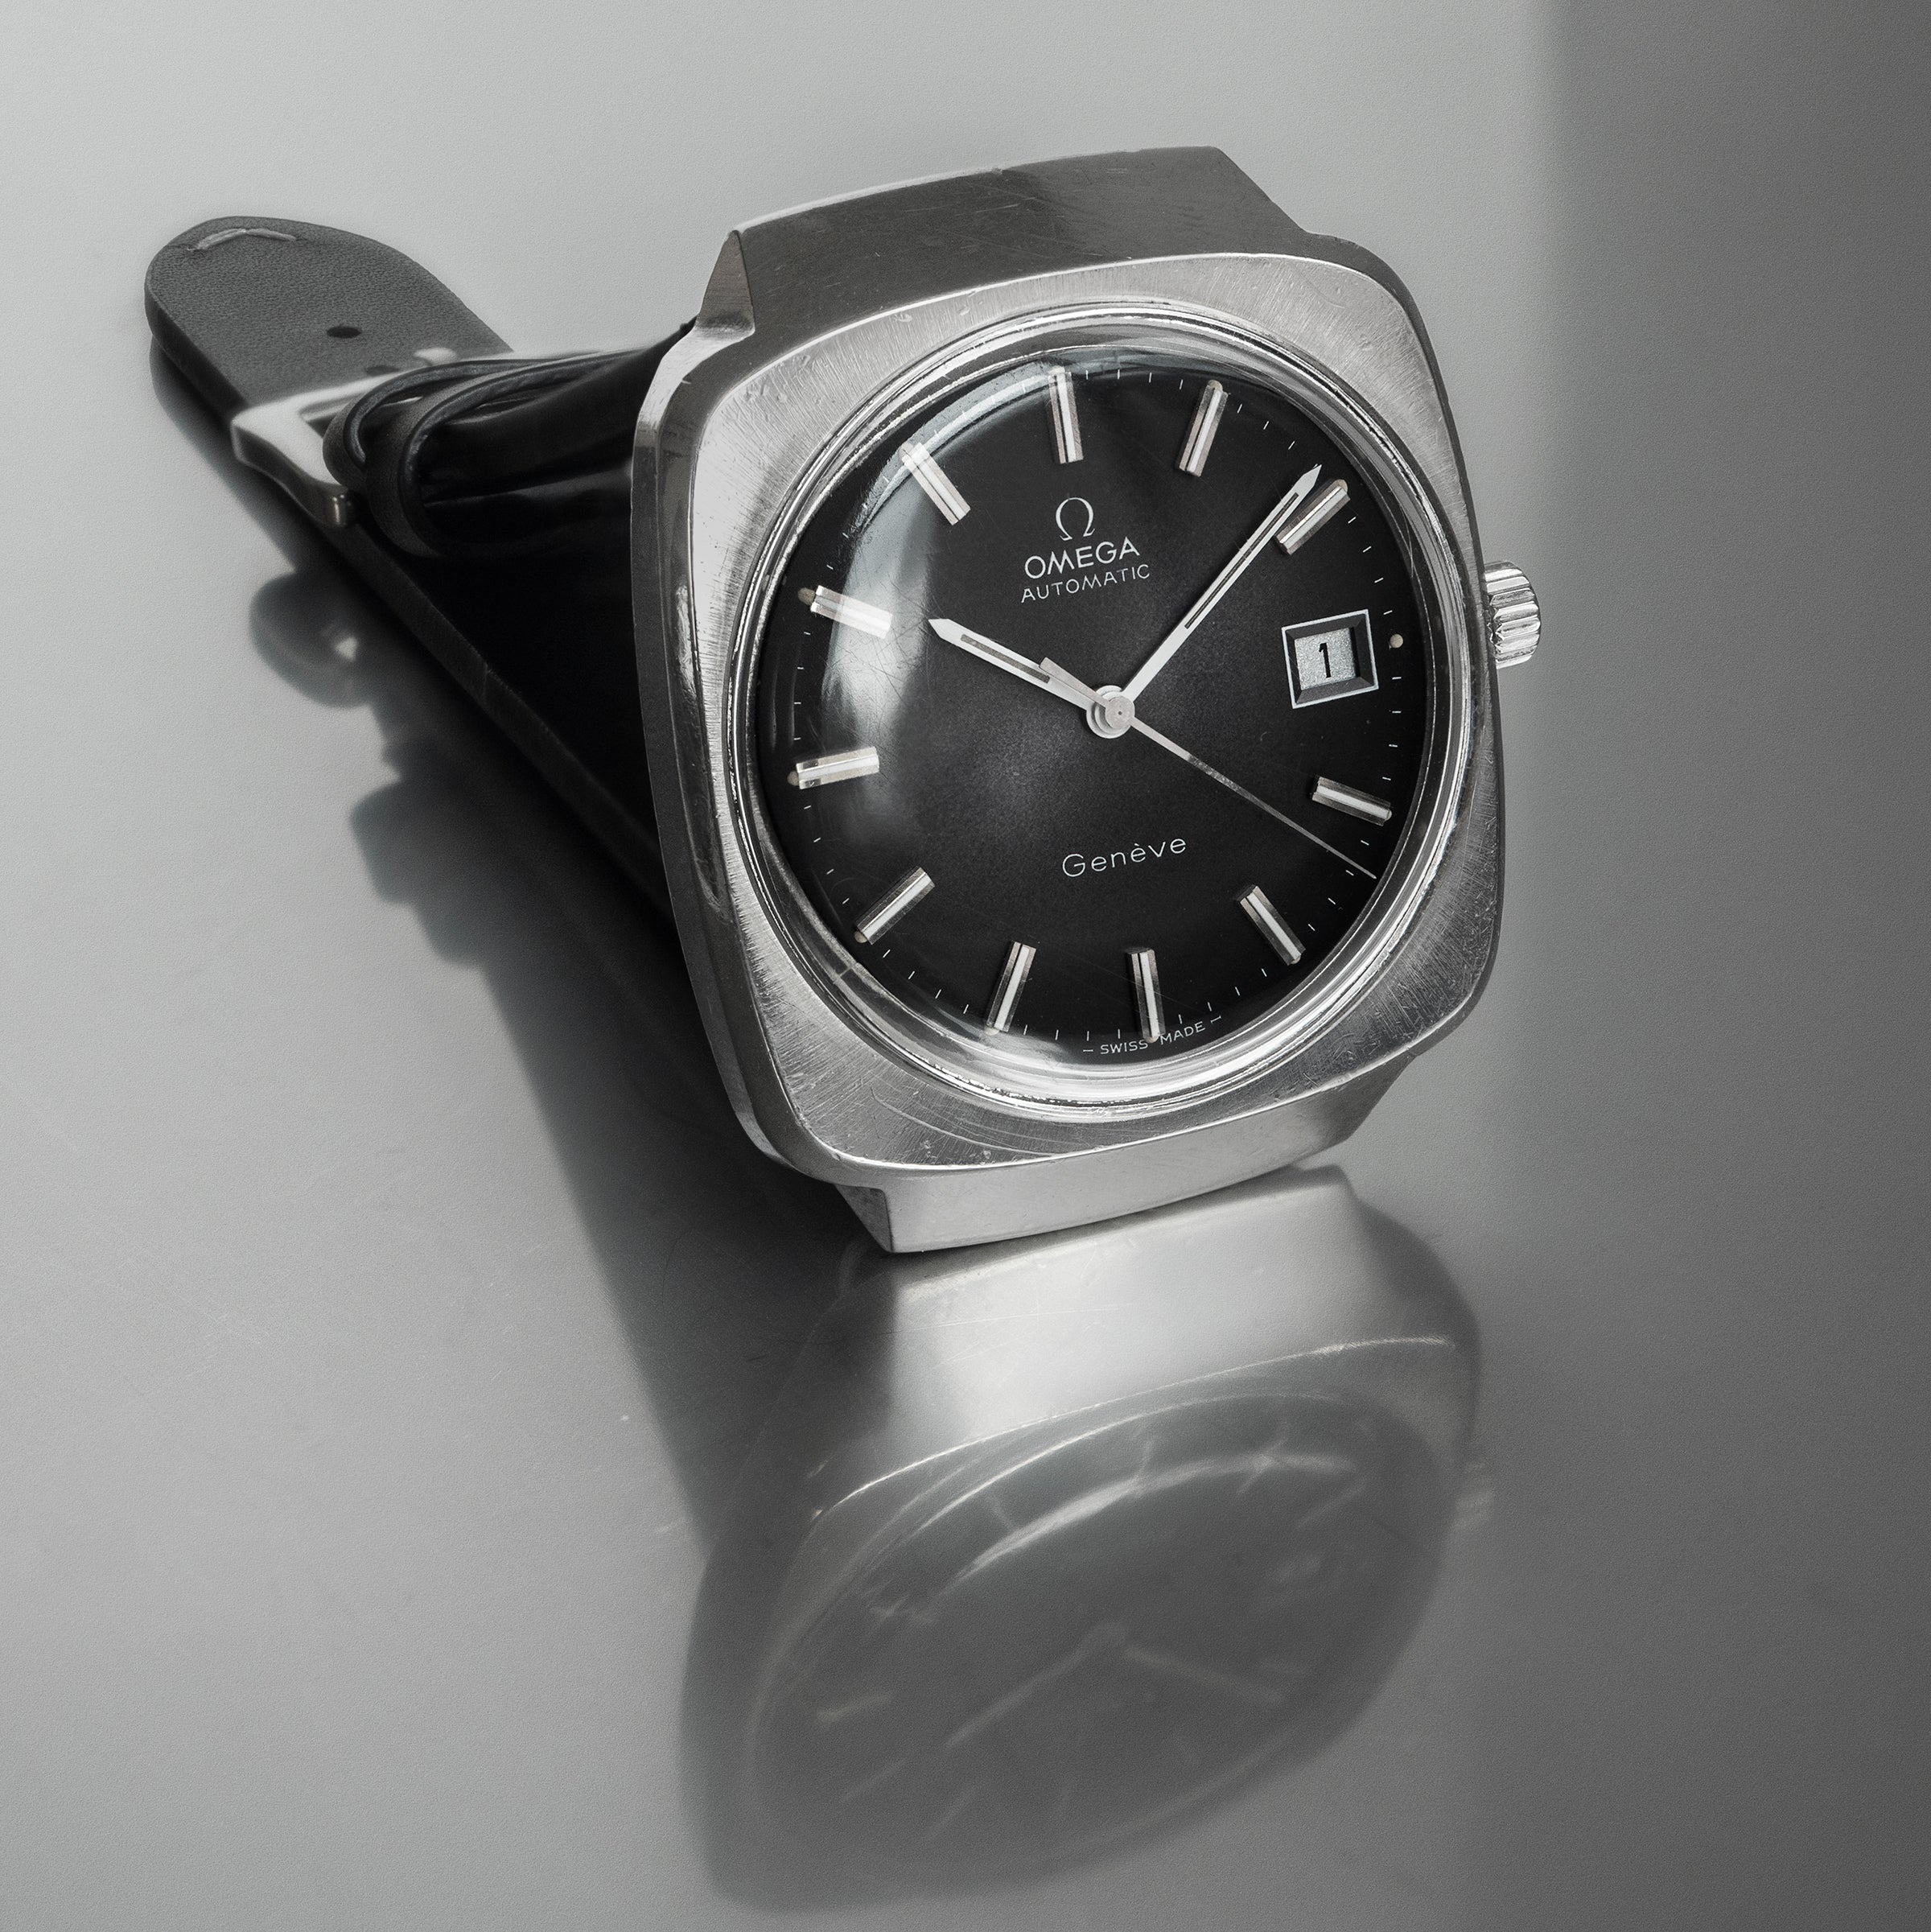 No. 687 / Omega Genève “Jumbo” - 1973 – From Time To Times